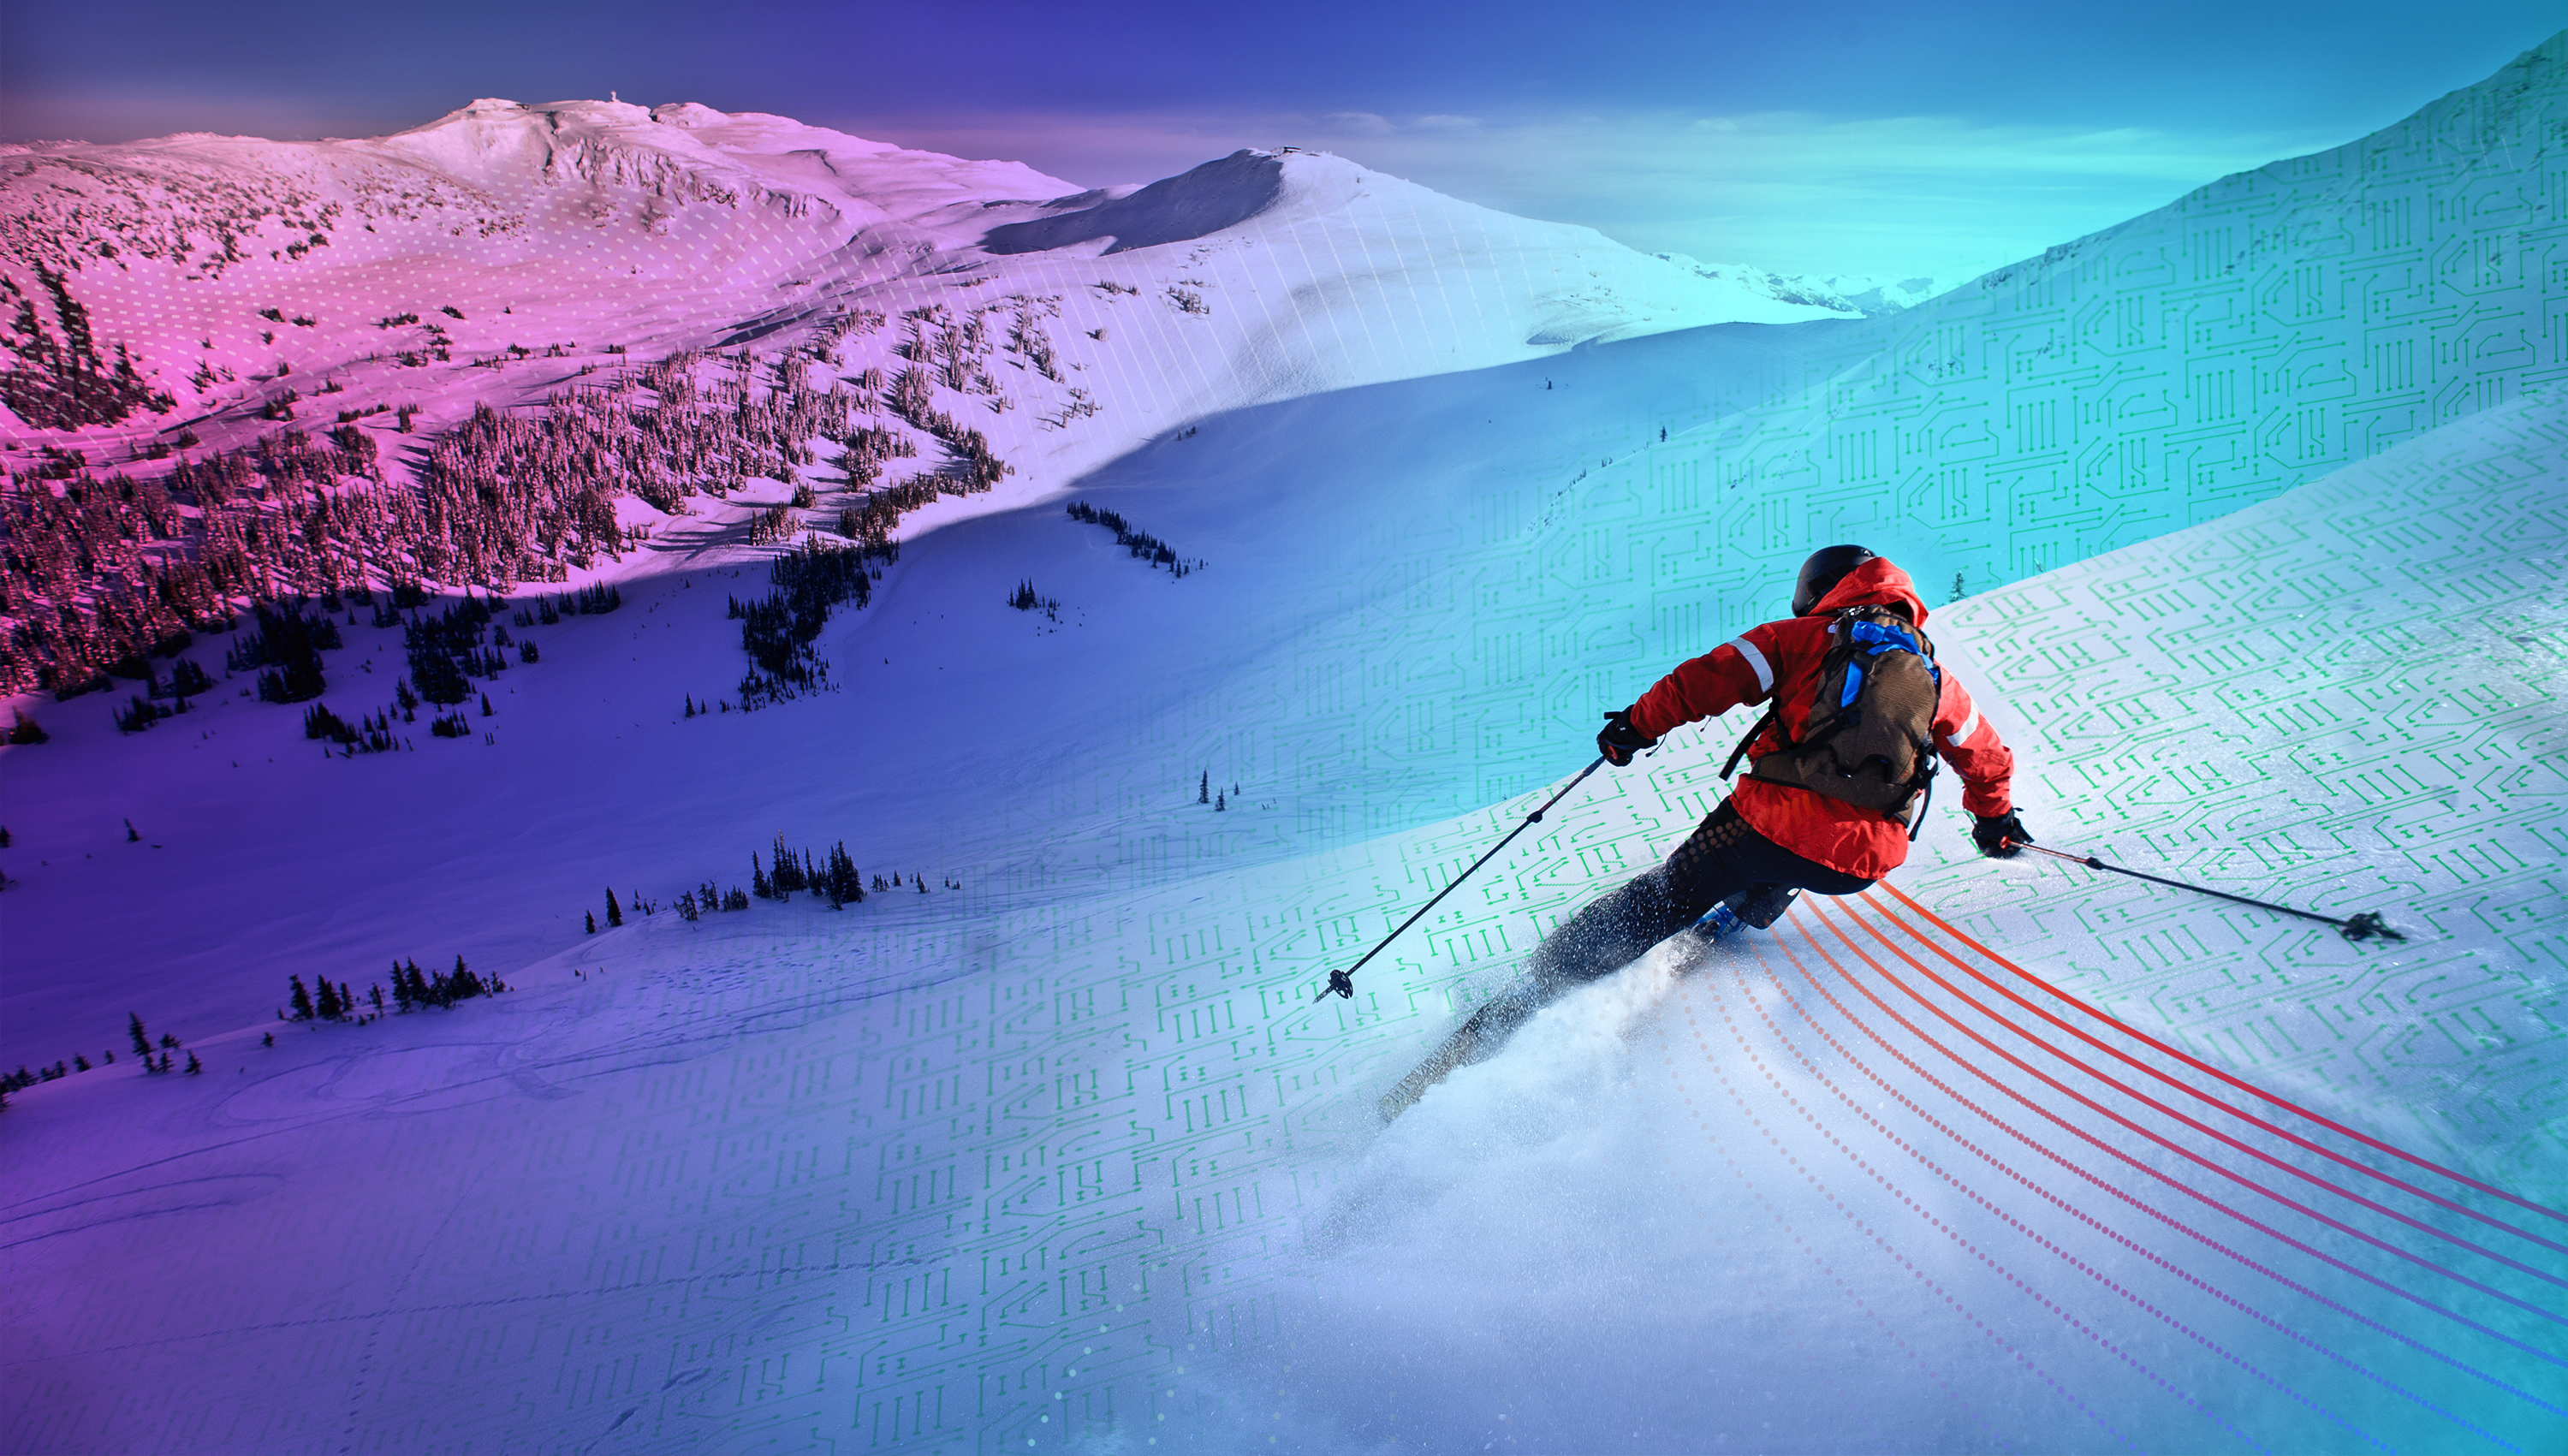 Digital image of skier going down mountain